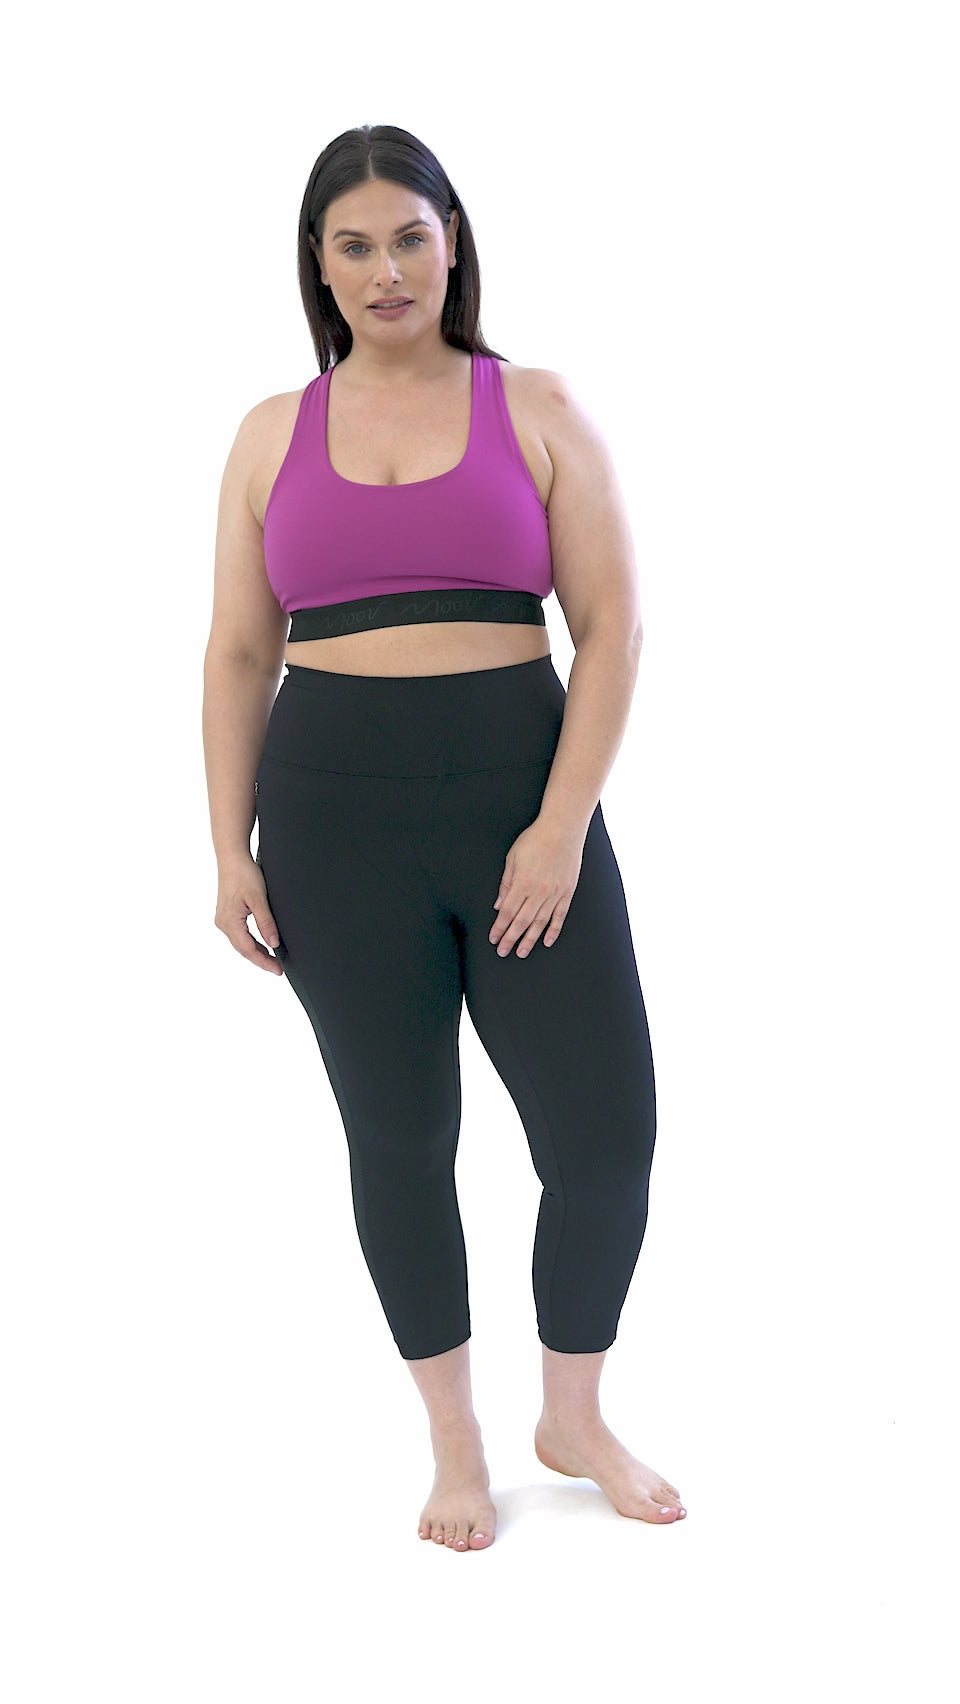 The Incline 22 '' Cropped Sports Legging (7/8) biodegradable fabric